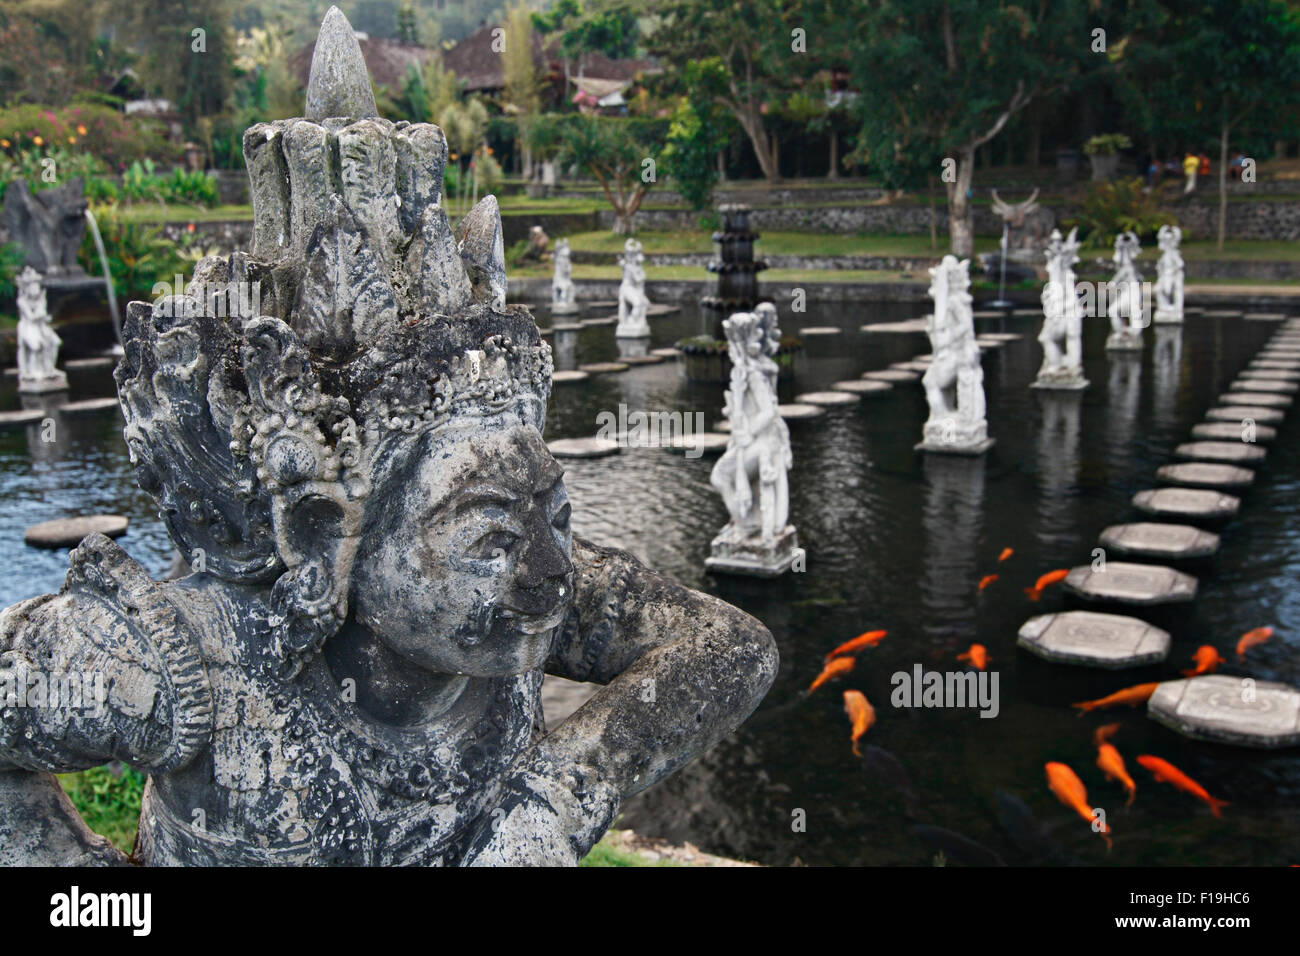 px41653-D. Taman Tirtagangga, statues around pool with goldfish. Bali. Indonesia. Photo Copyright © Brandon Cole. All rights res Stock Photo